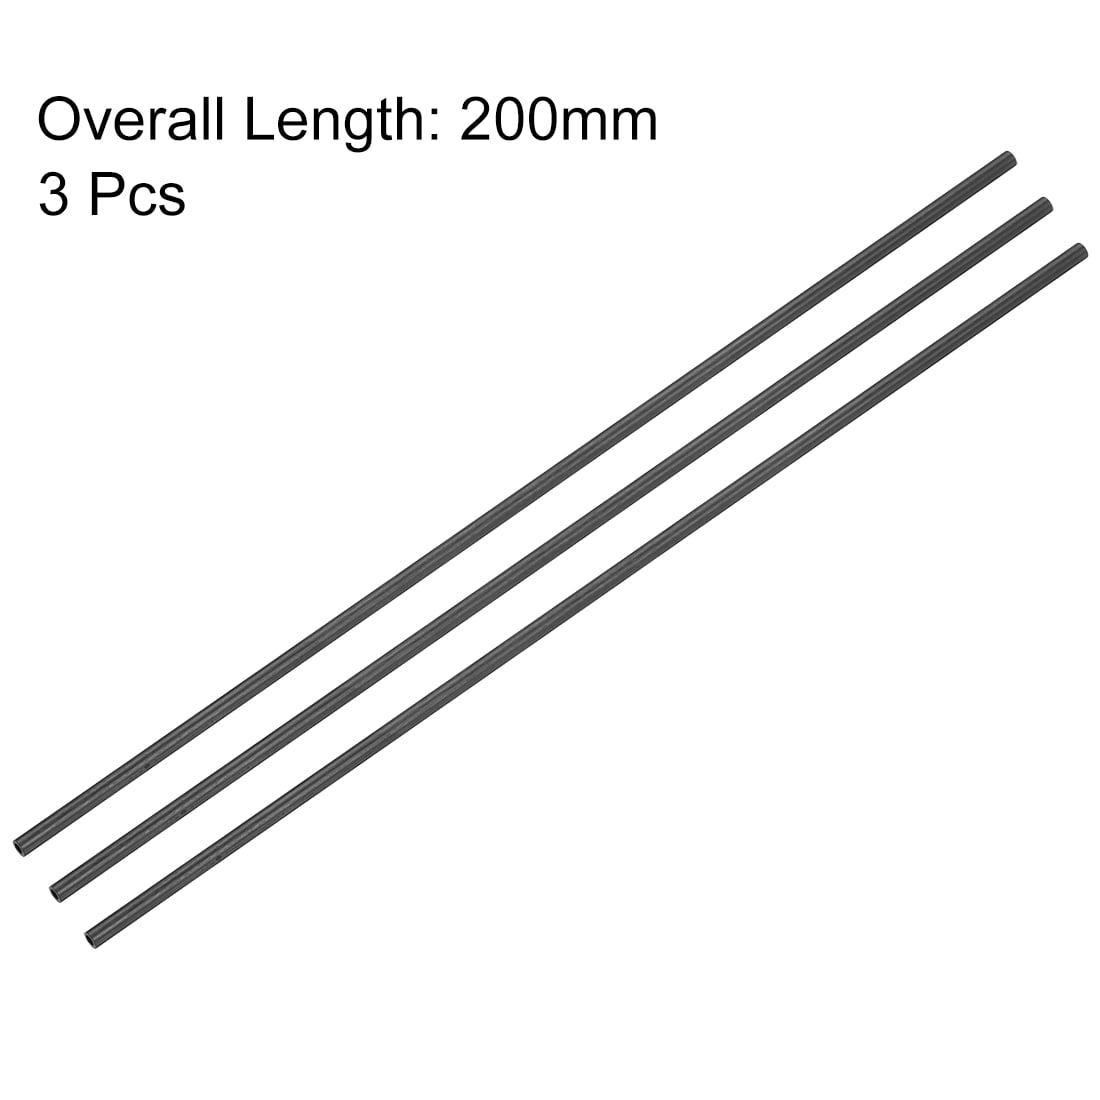 3mm x 2mm x 200mm Round Carbon Fiber Round Tube Carbon Fiber Wing Pultrusion Tube for RC Plane Quadcopter 2pcs 